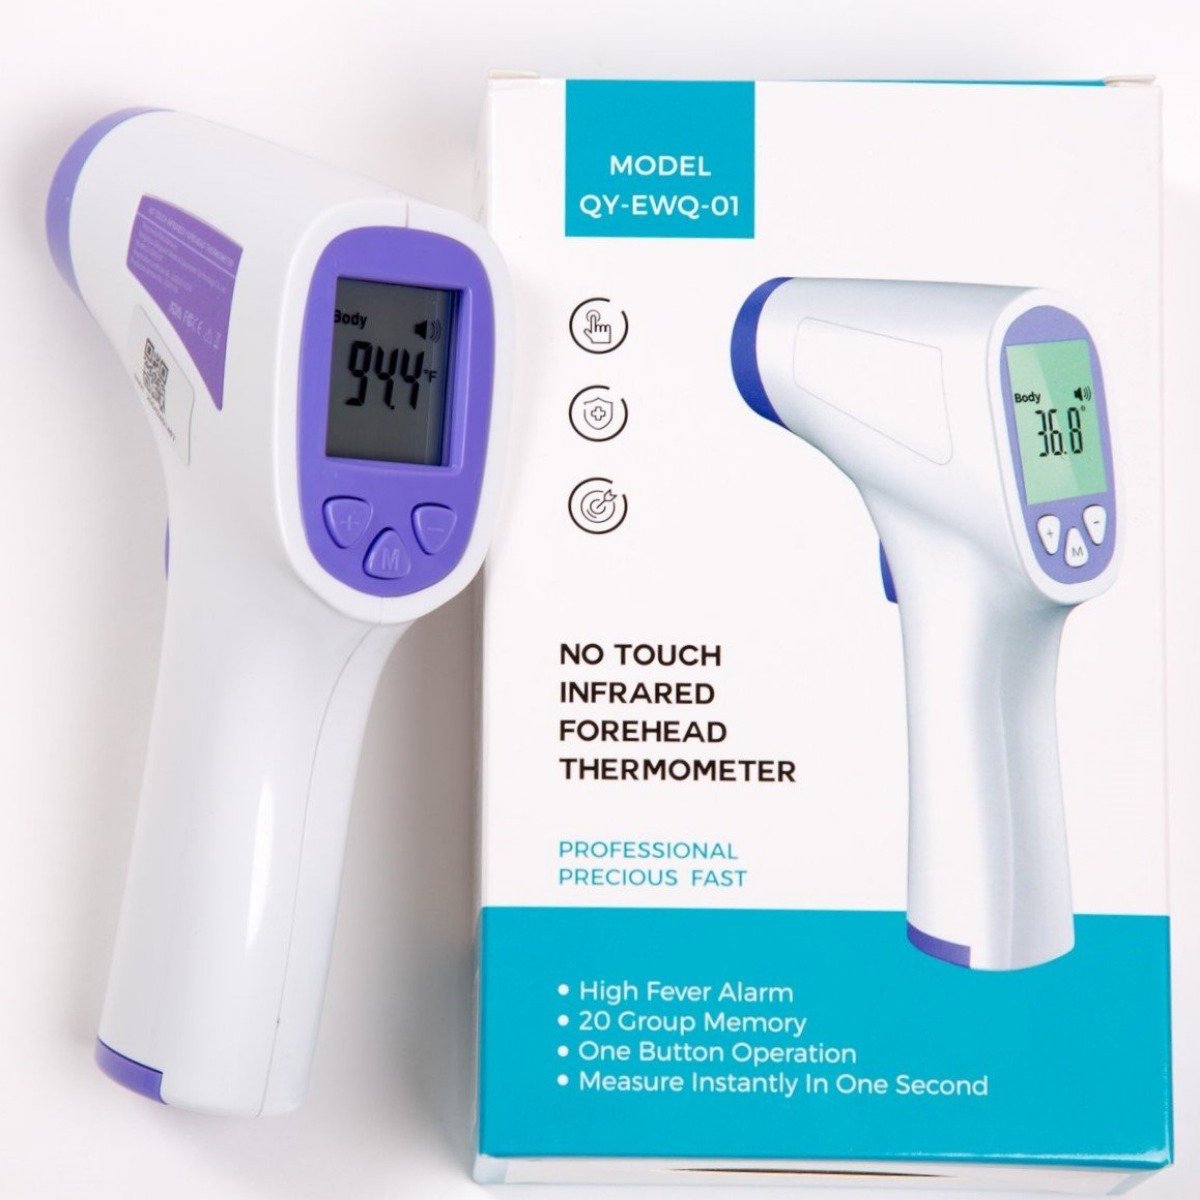 No - Touch Infrared Forehead Thermometer
Fda & Ce Approved
Fast Reading With One Button Operation 
High Fever Alarm 
Optional Of ℉ / ℃ Settings